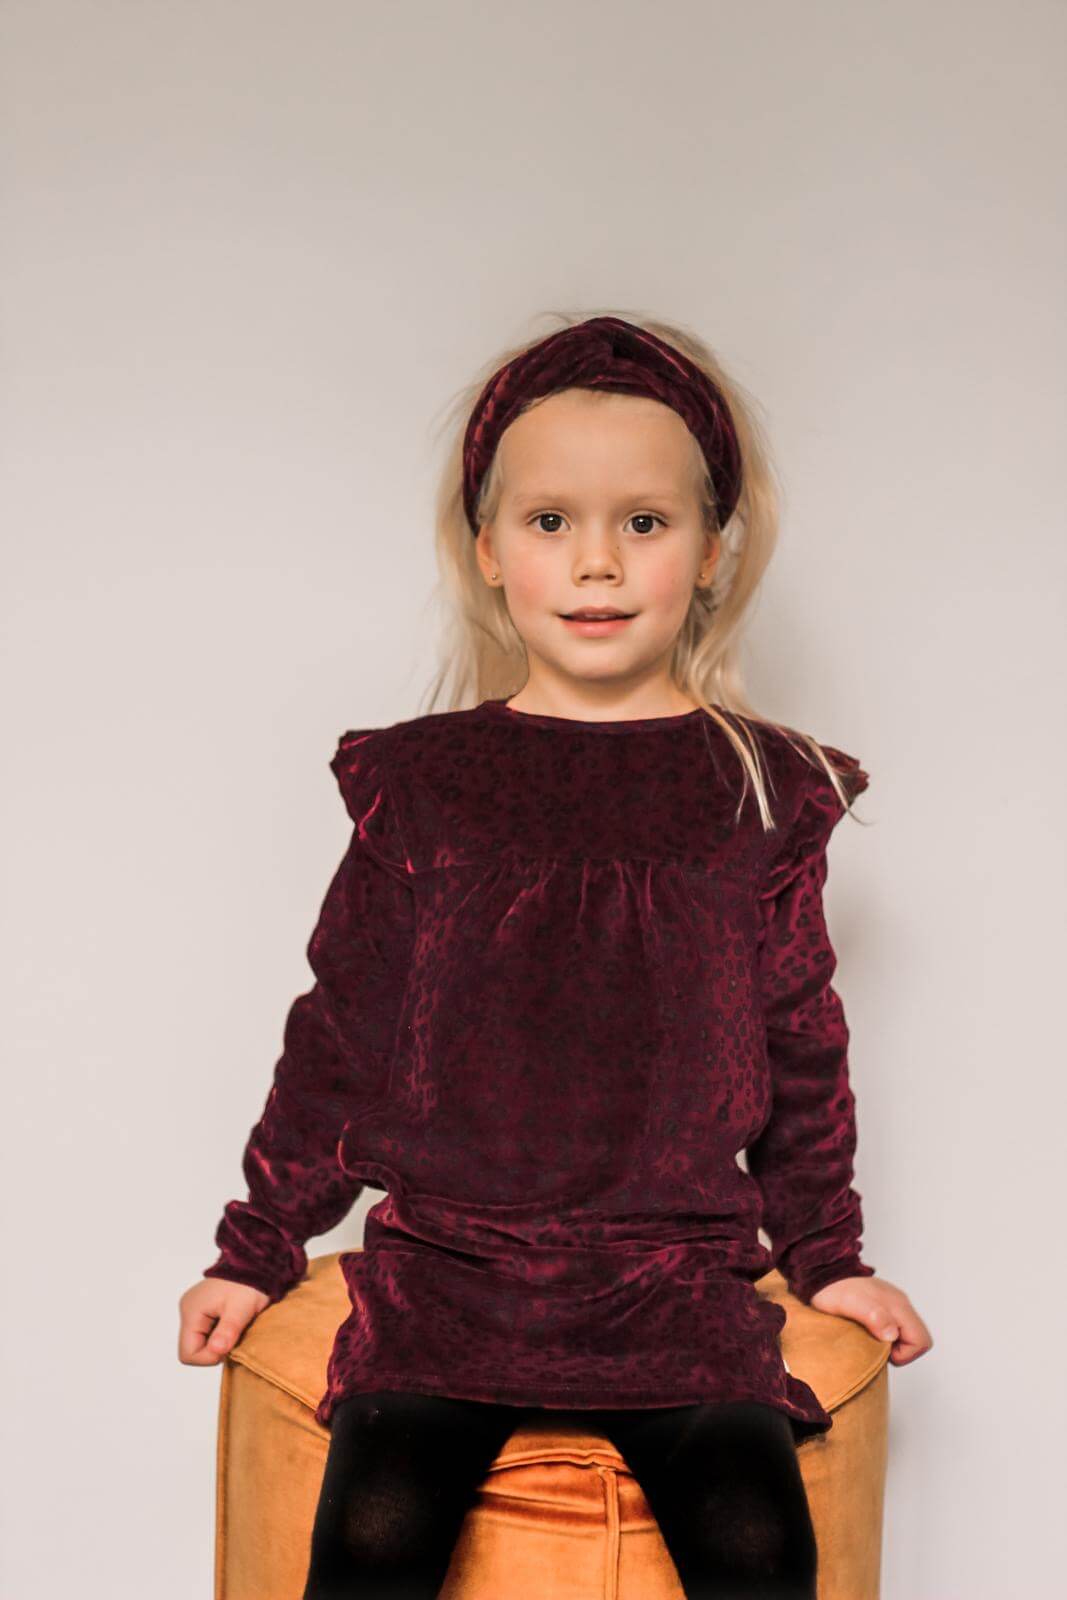 Your Wishes Panther Ruffle Sweater Dress - Jurkje - Rood2